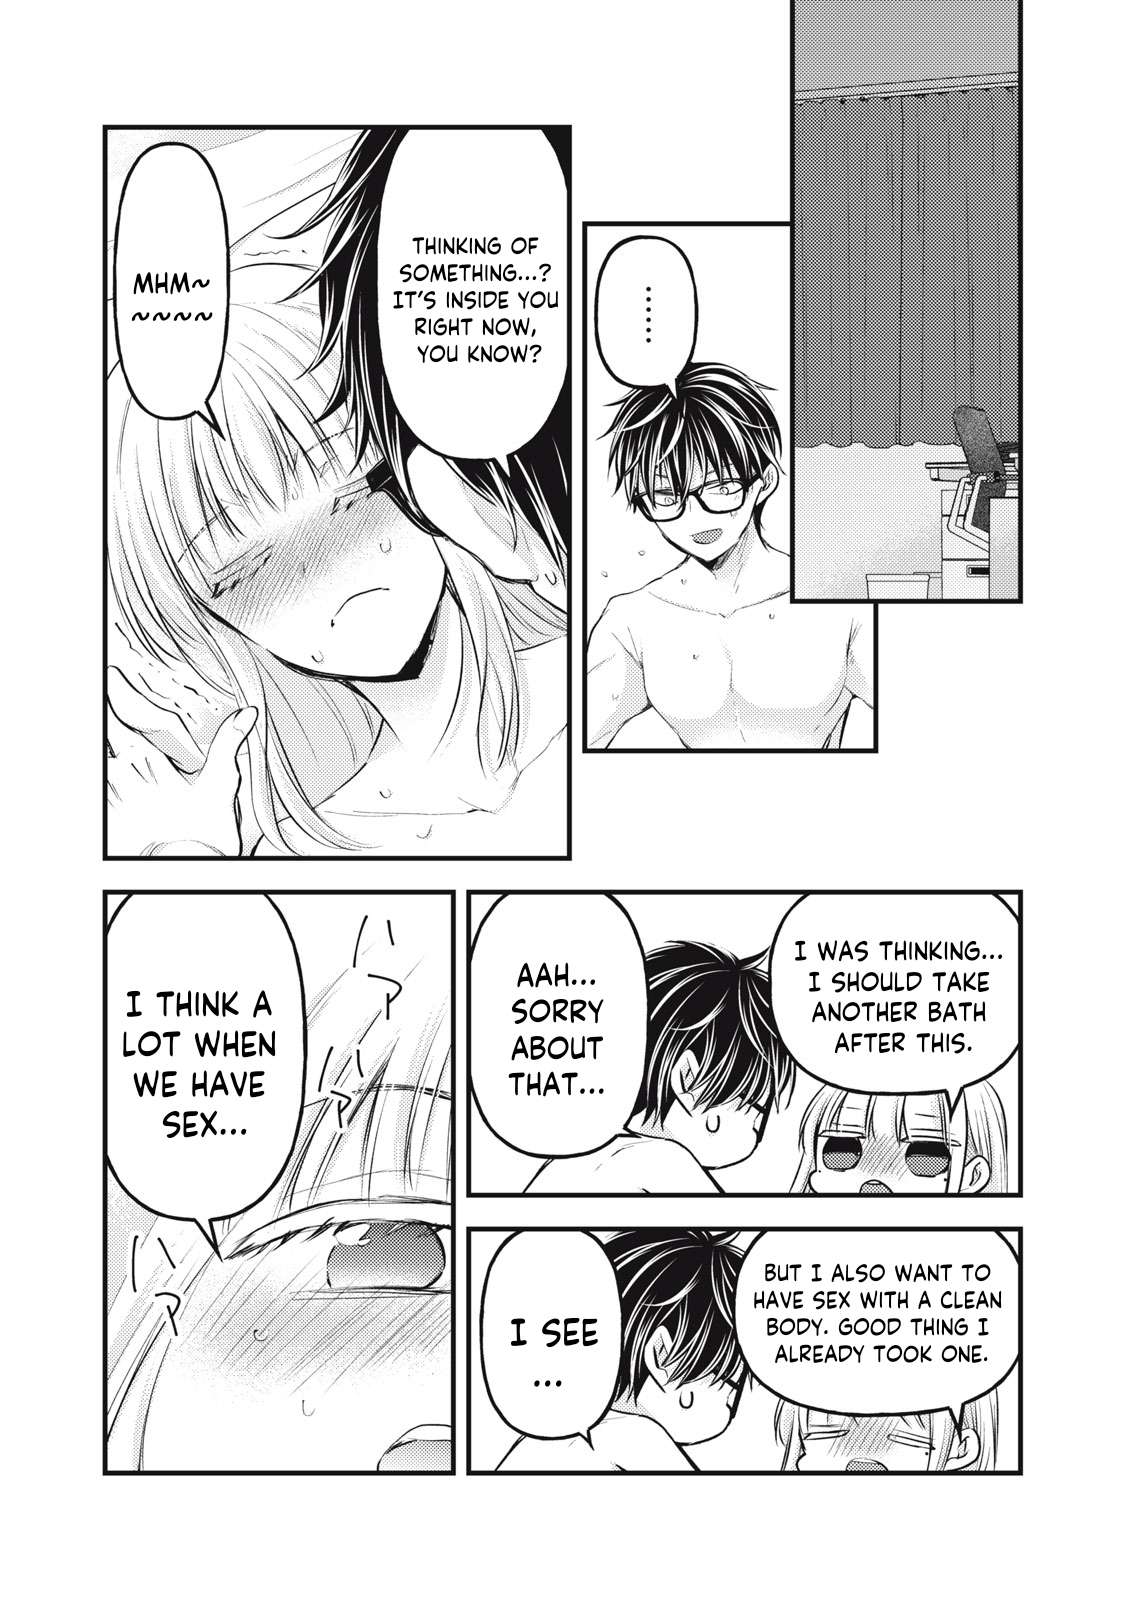 We May Be an Inexperienced Couple but... chapter 121 page 12